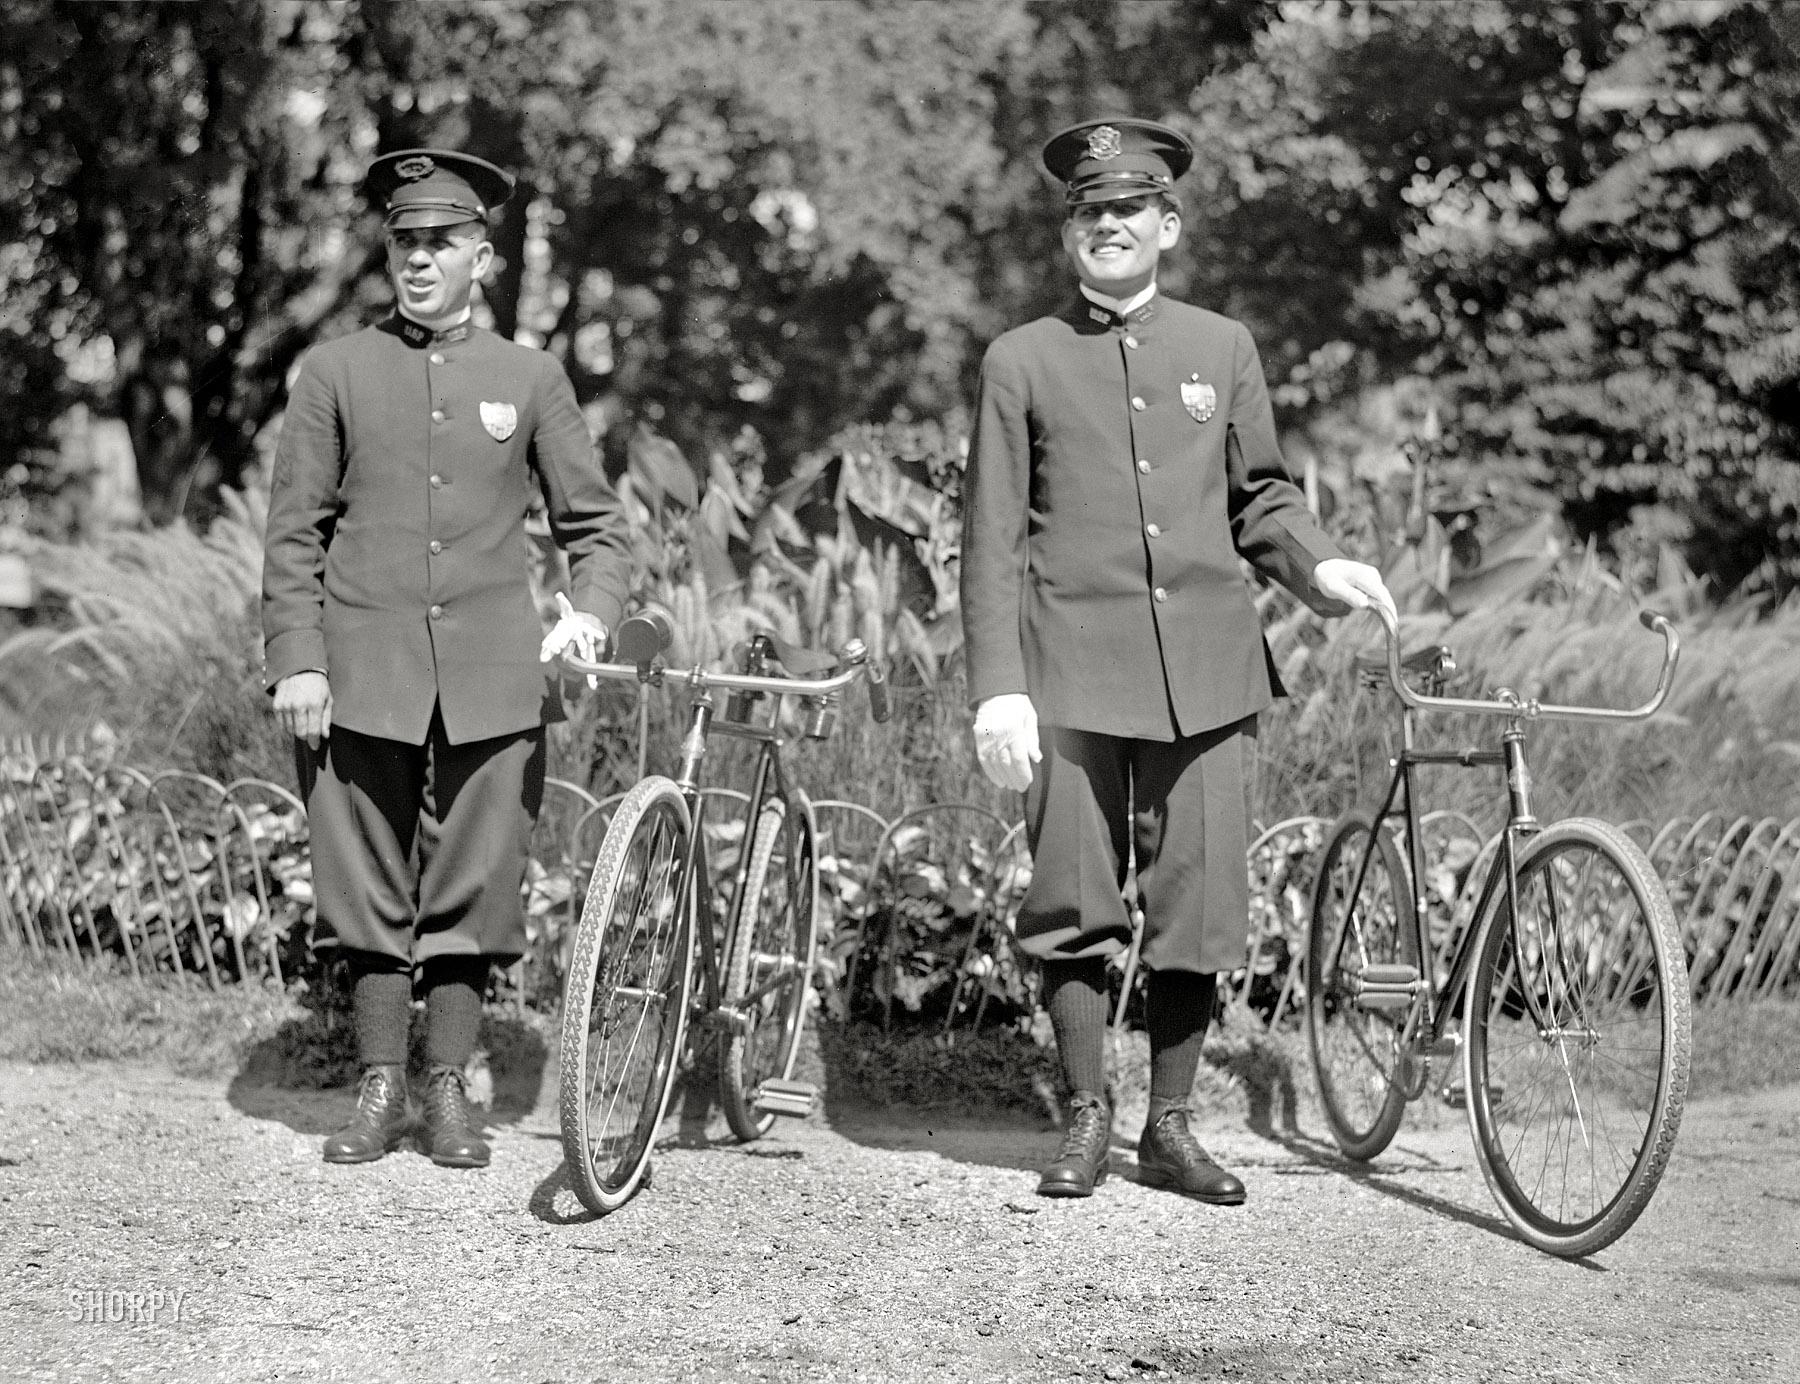 Washington, D.C., 1918. "District of Columbia parks -- park policemen." Harris & Ewing Collection glass negative. View full size.